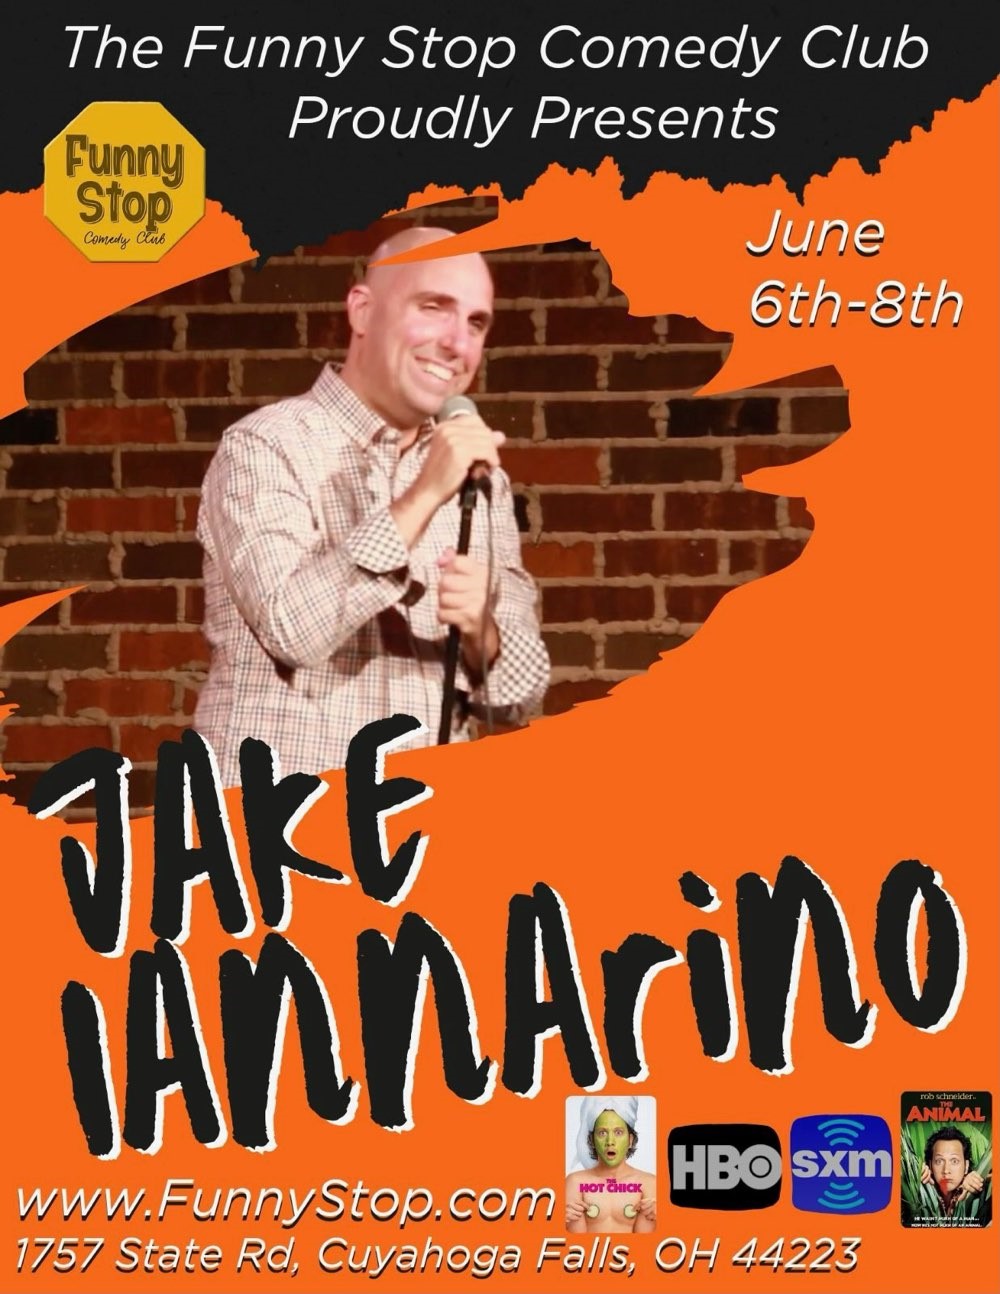 Jake Iannarino - Thur. 8PM Show Funny Stop Comedy Club on Jun 06, 20:00@Funny Stop Comedy Club - Buy tickets and Get information on Funny Stop funnystop.online